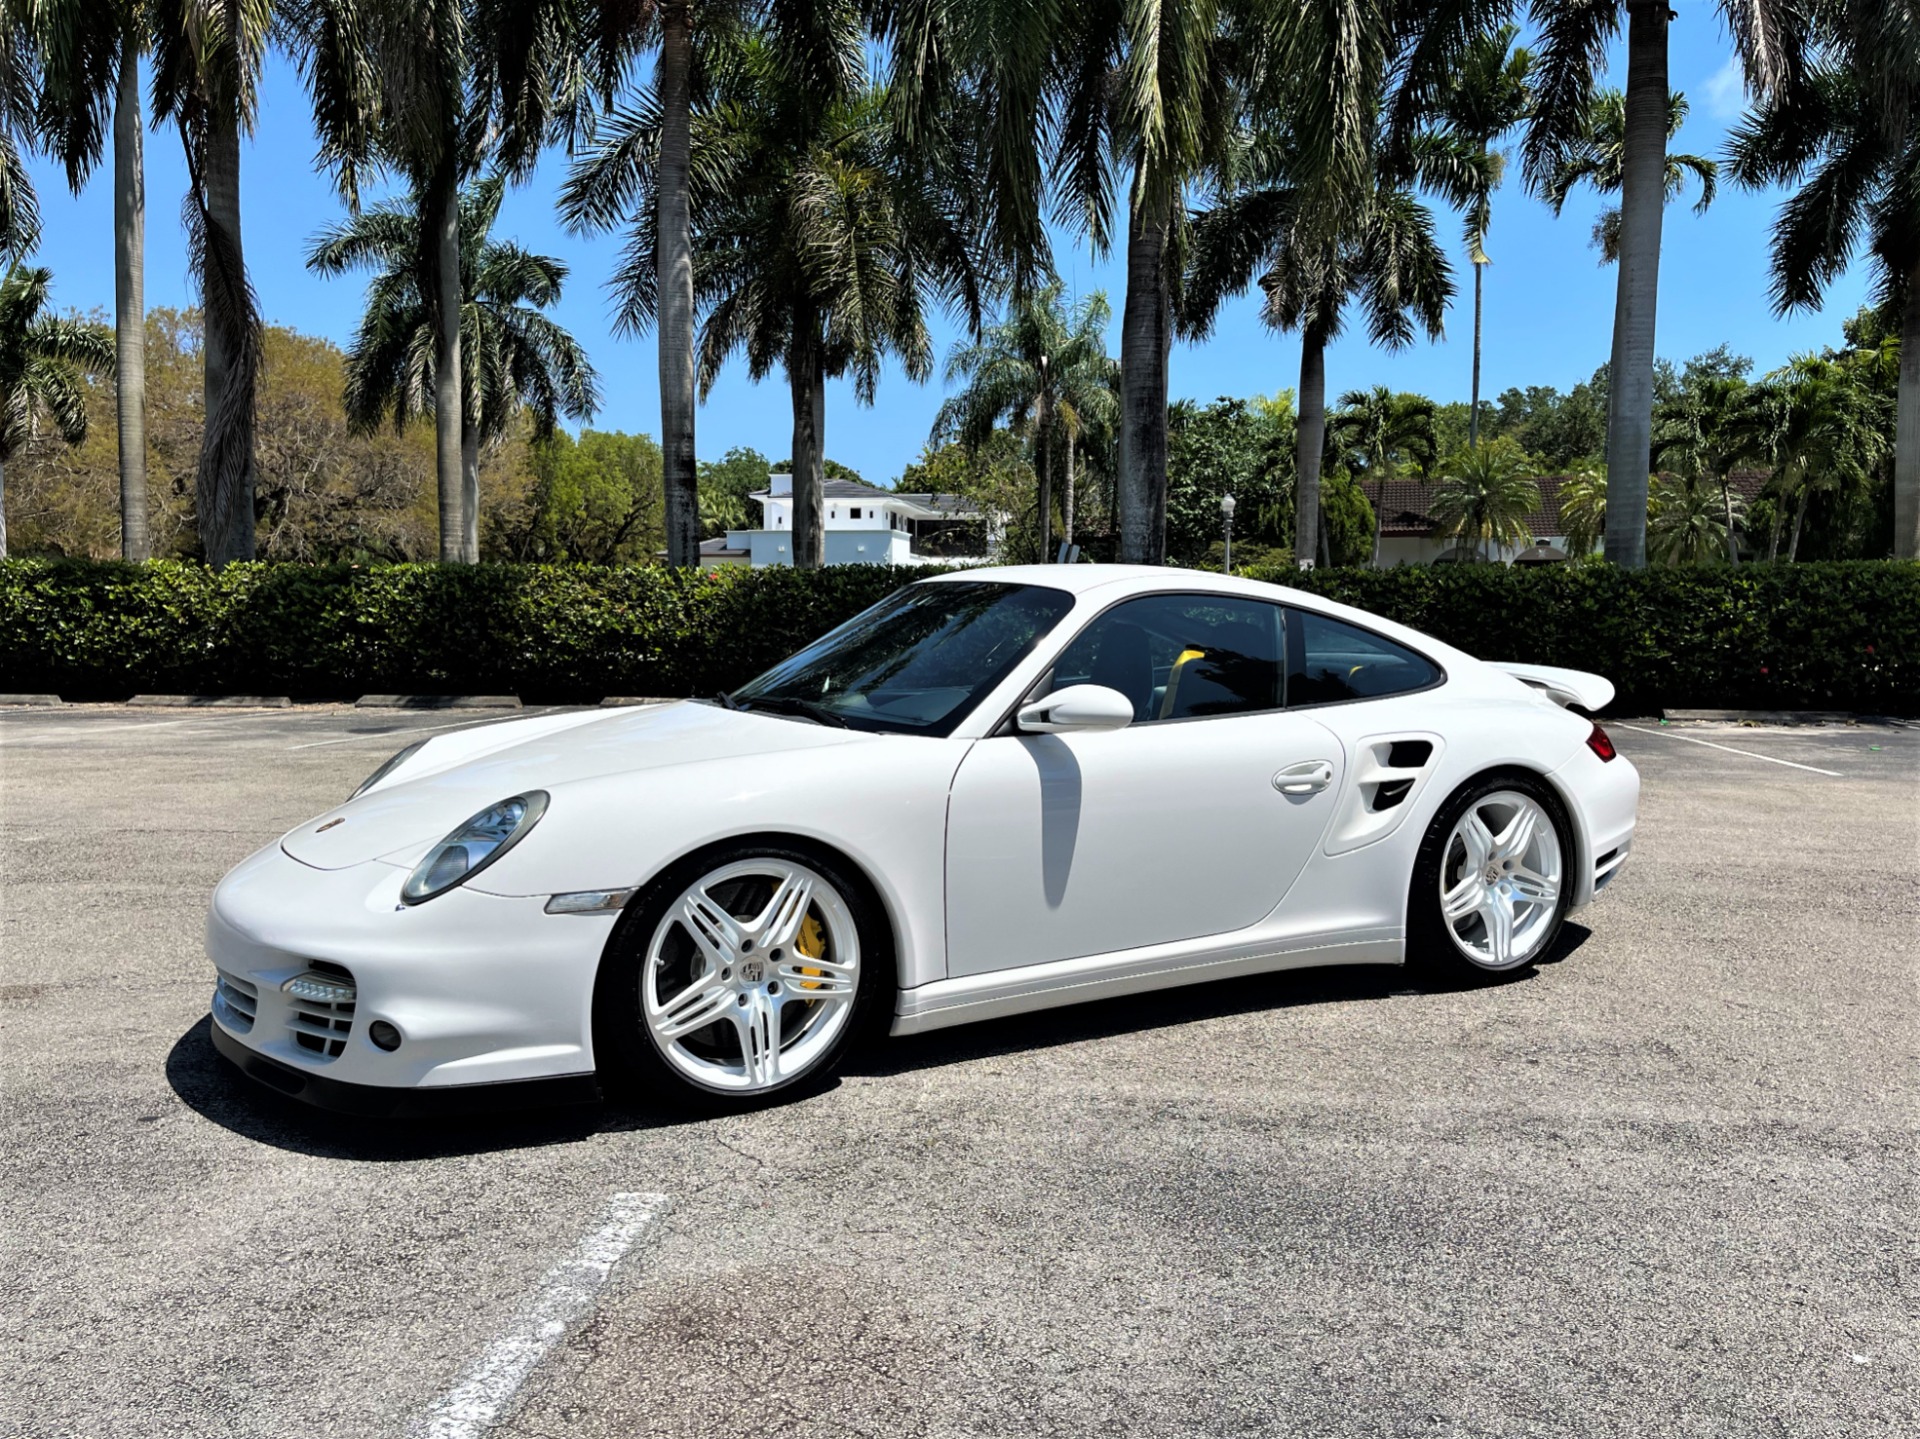 Used 2008 Porsche 911 Turbo for sale Sold at The Gables Sports Cars in Miami FL 33146 4